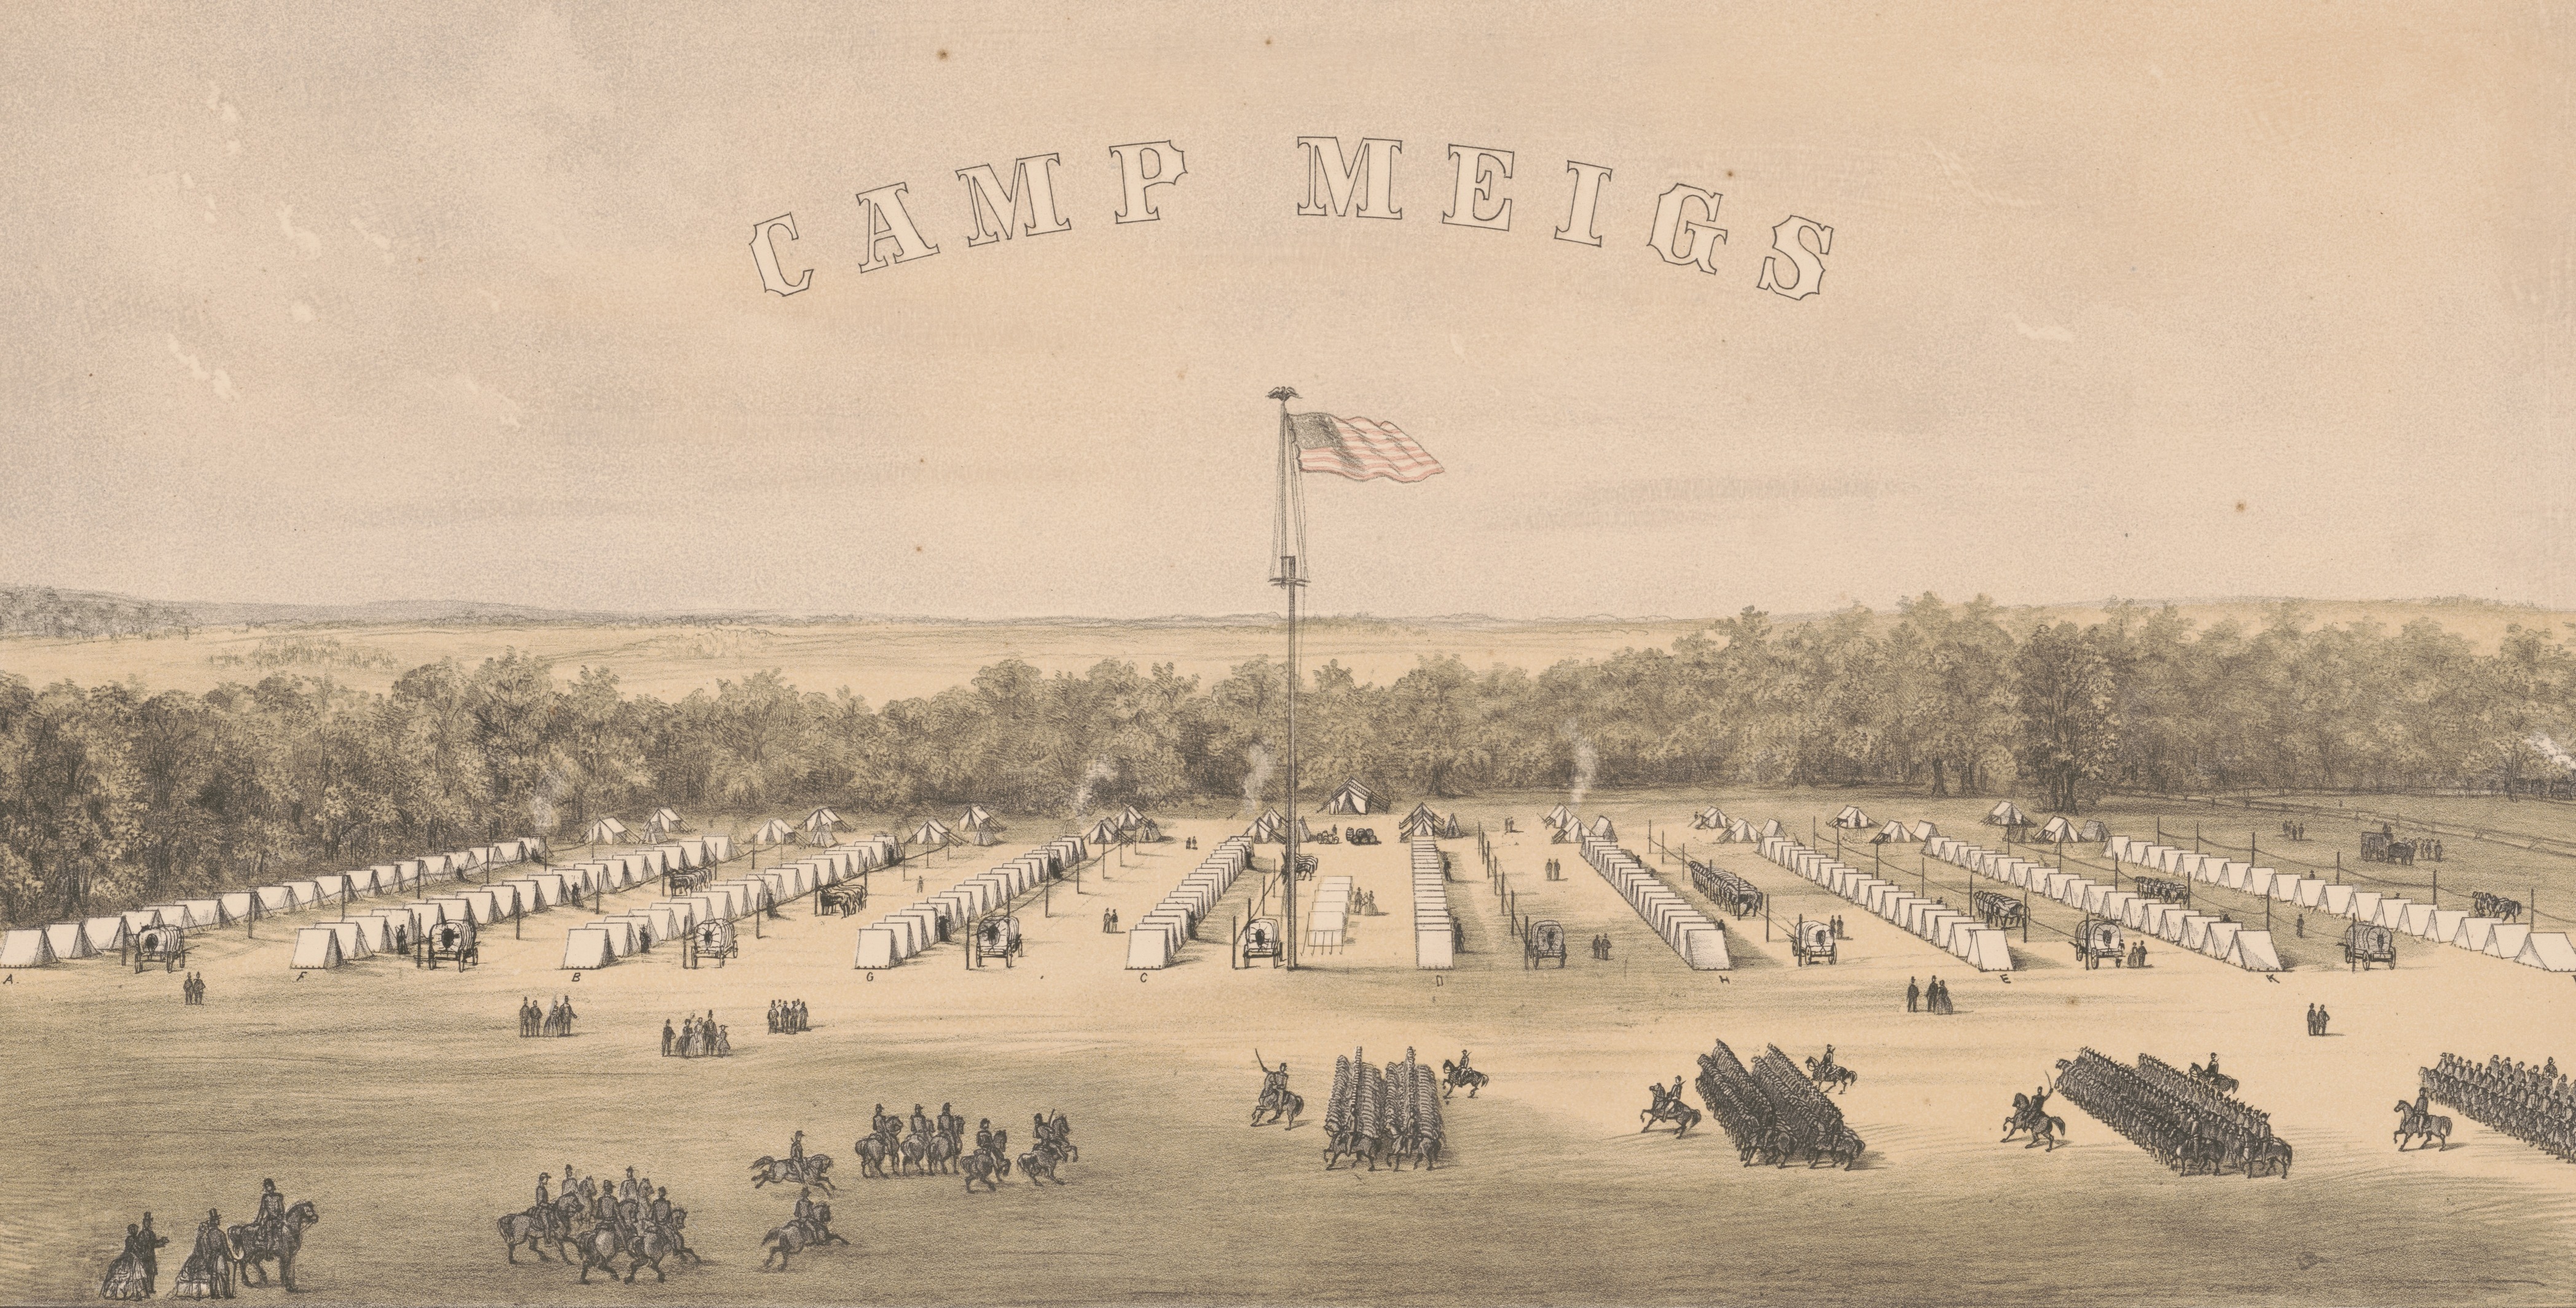 Birds eye view of Camp Meigs, a military camp in Readville, Massachusetts. An American flag is raised in the middle, with white tents lined around the grounds, soldiers and horses throughout, and trees in the background.